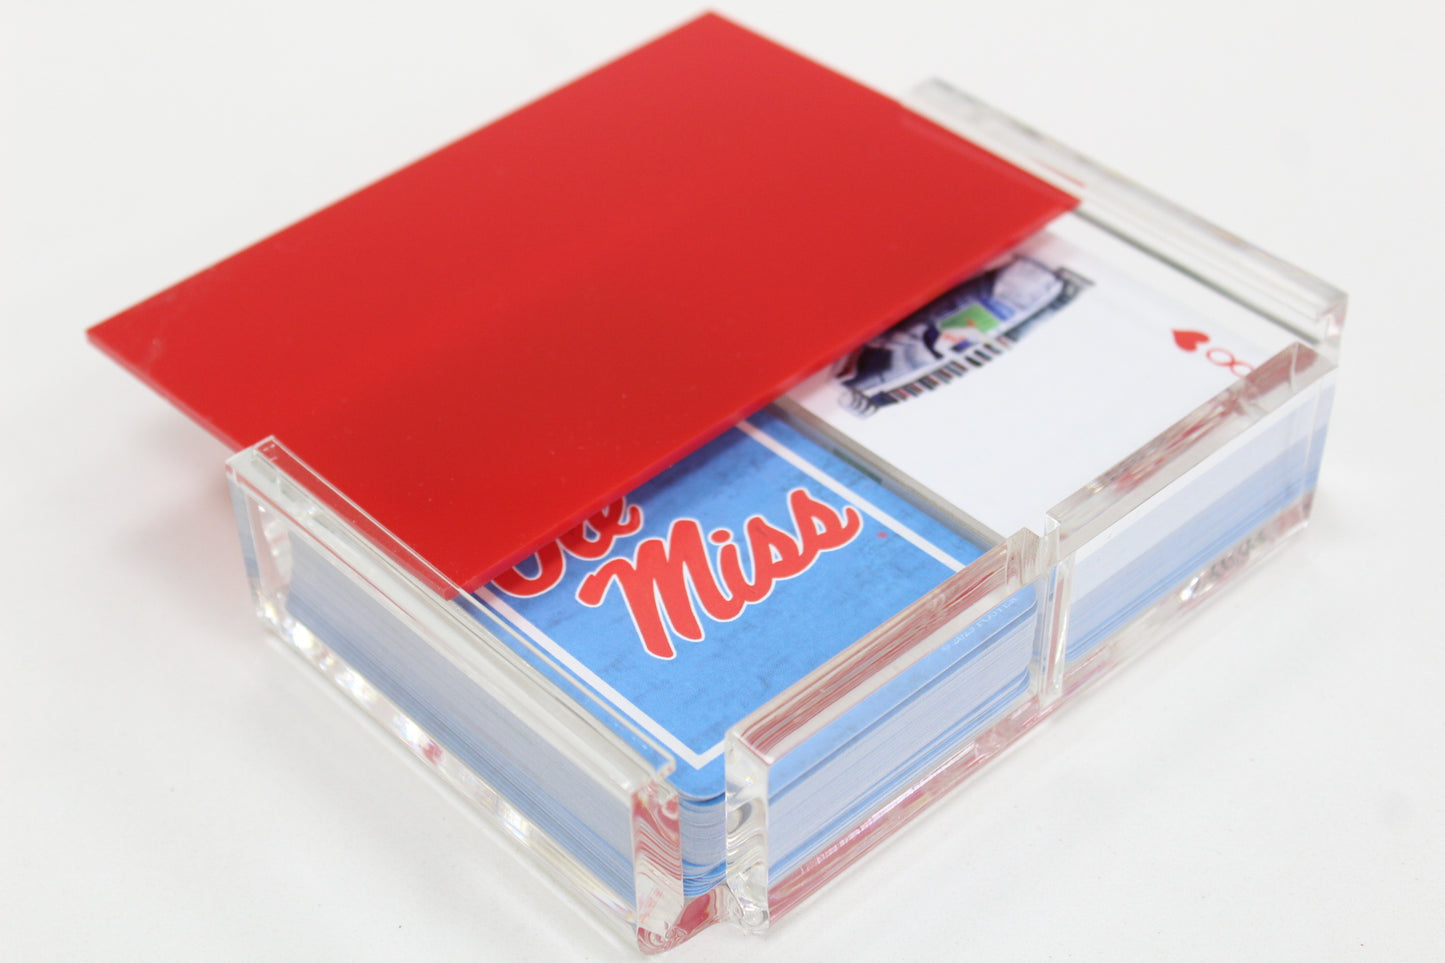 Ole Miss playing card and card case from FOSTER